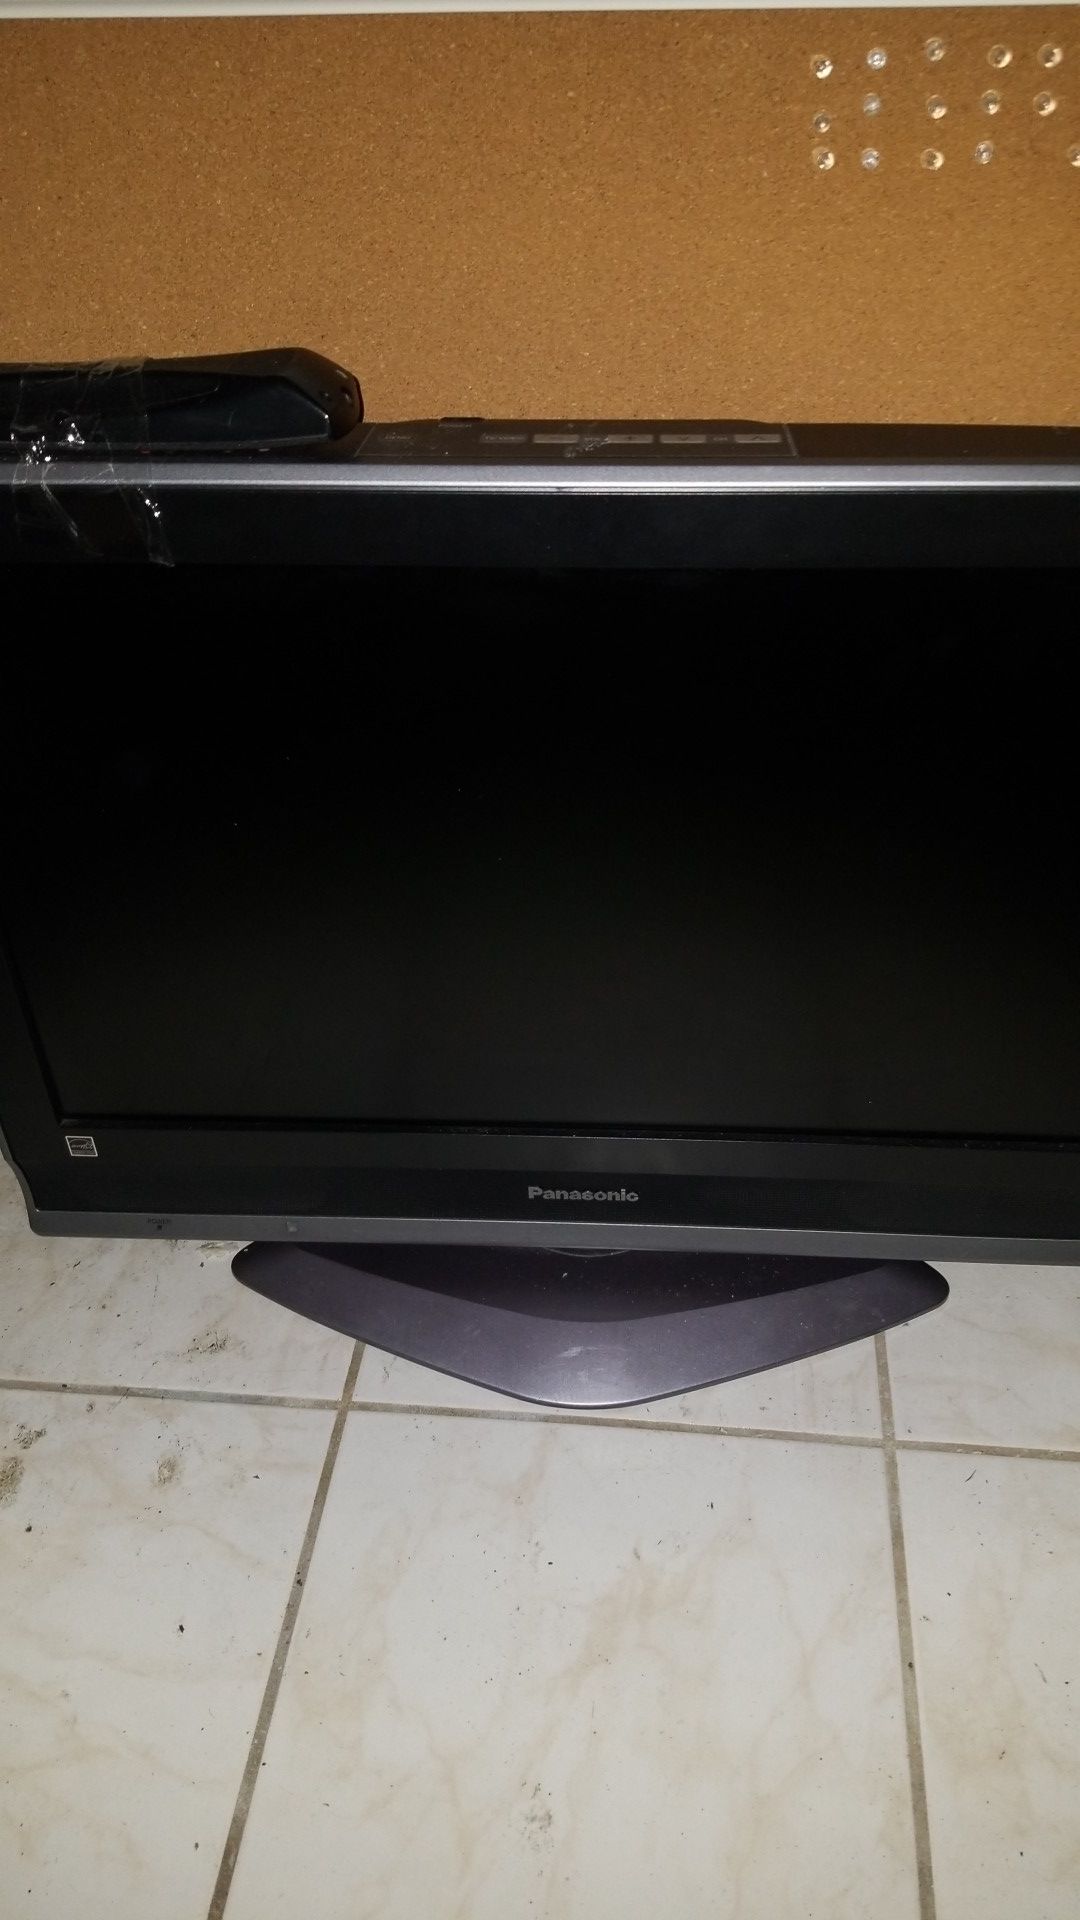 TV Panasonic 26" screen with remote control